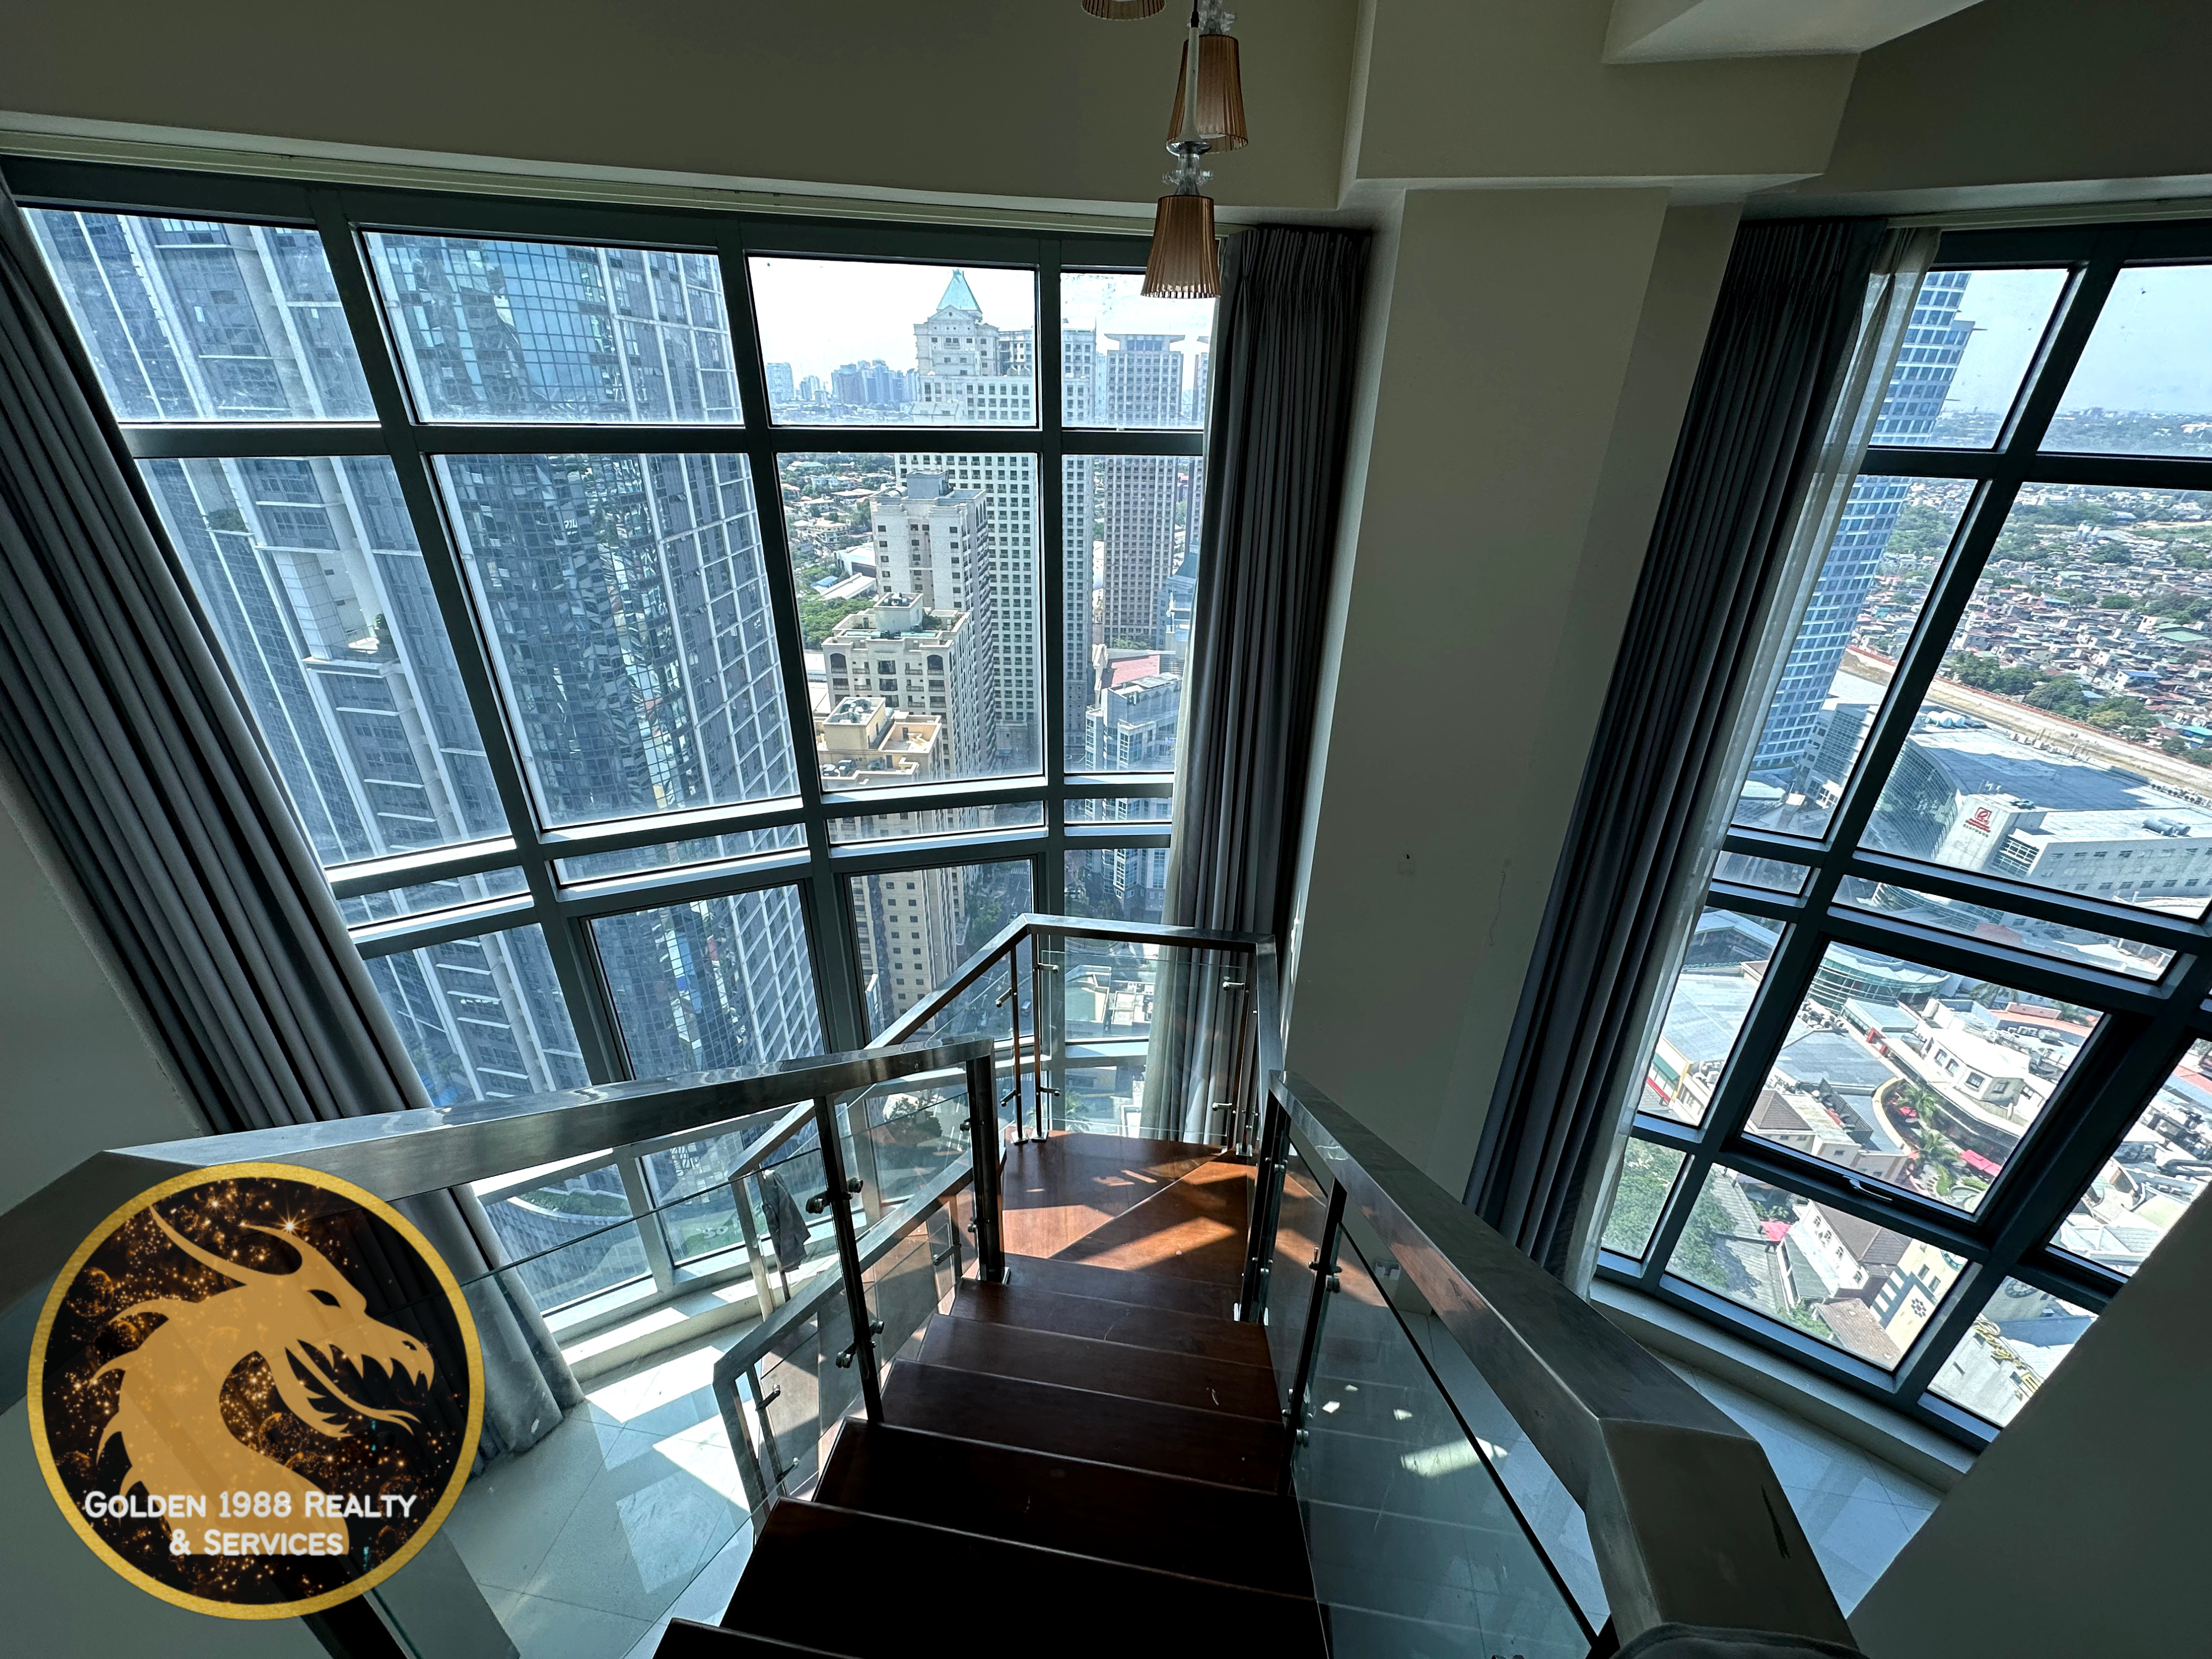 Bird's eye view of the whole Eastwood city from the 2 bedroom loft unit